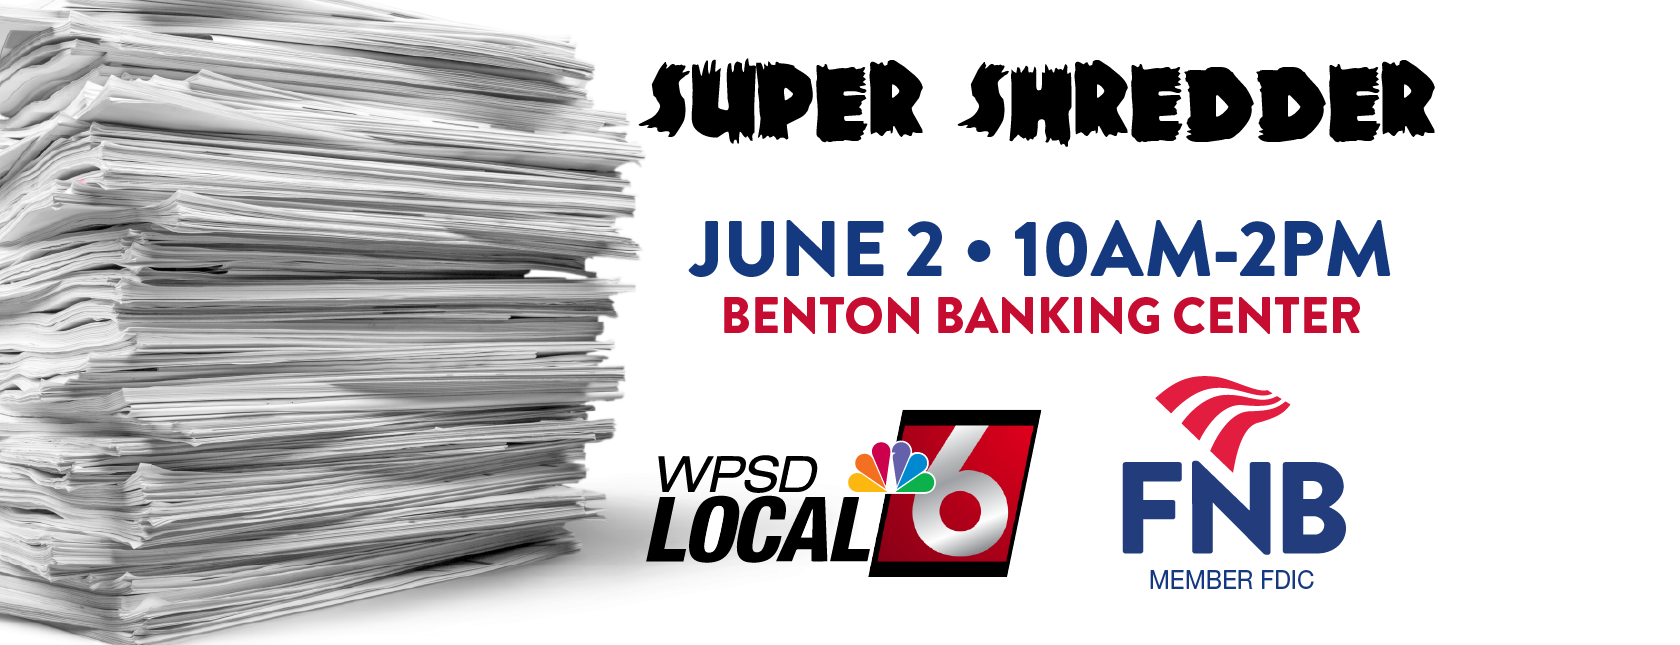 Super Shredder Coming to FNB's Benton Office on Thursday, June 2nd from 10 AM to 2 PM